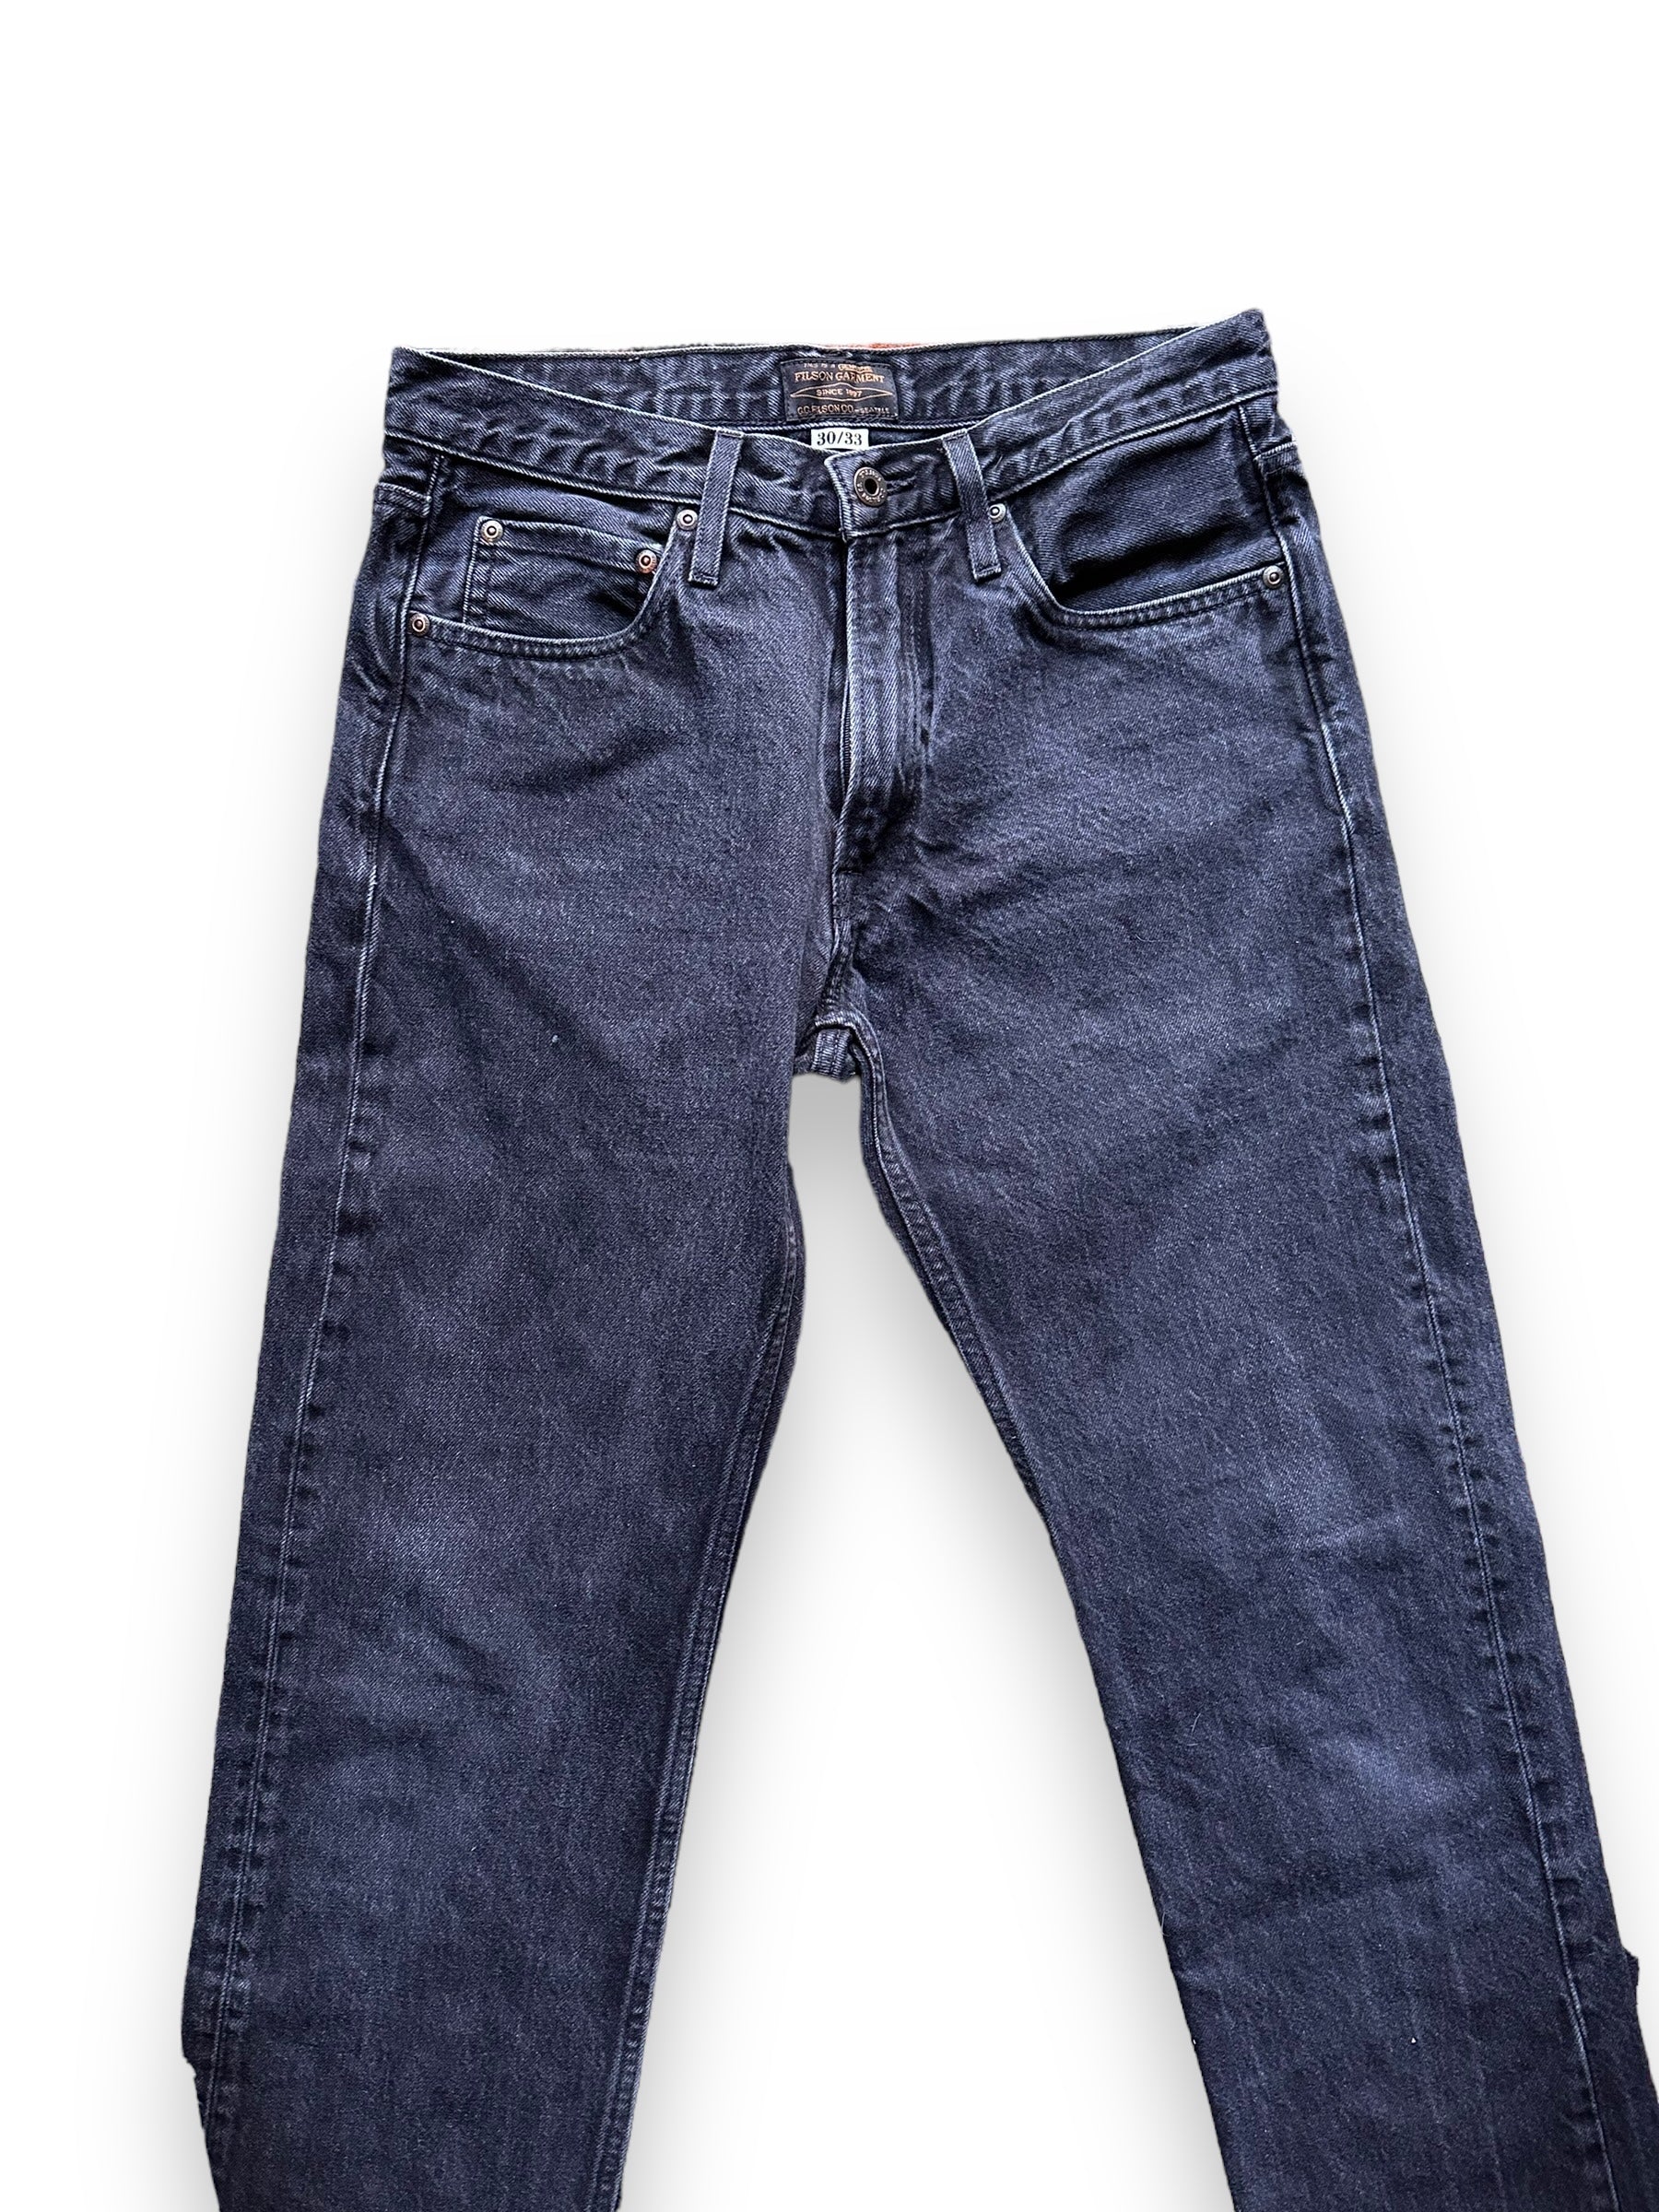 Upper Front View of Black Filson Jeans W31 |  Filson Dungarees | Filson Workwear Seattle